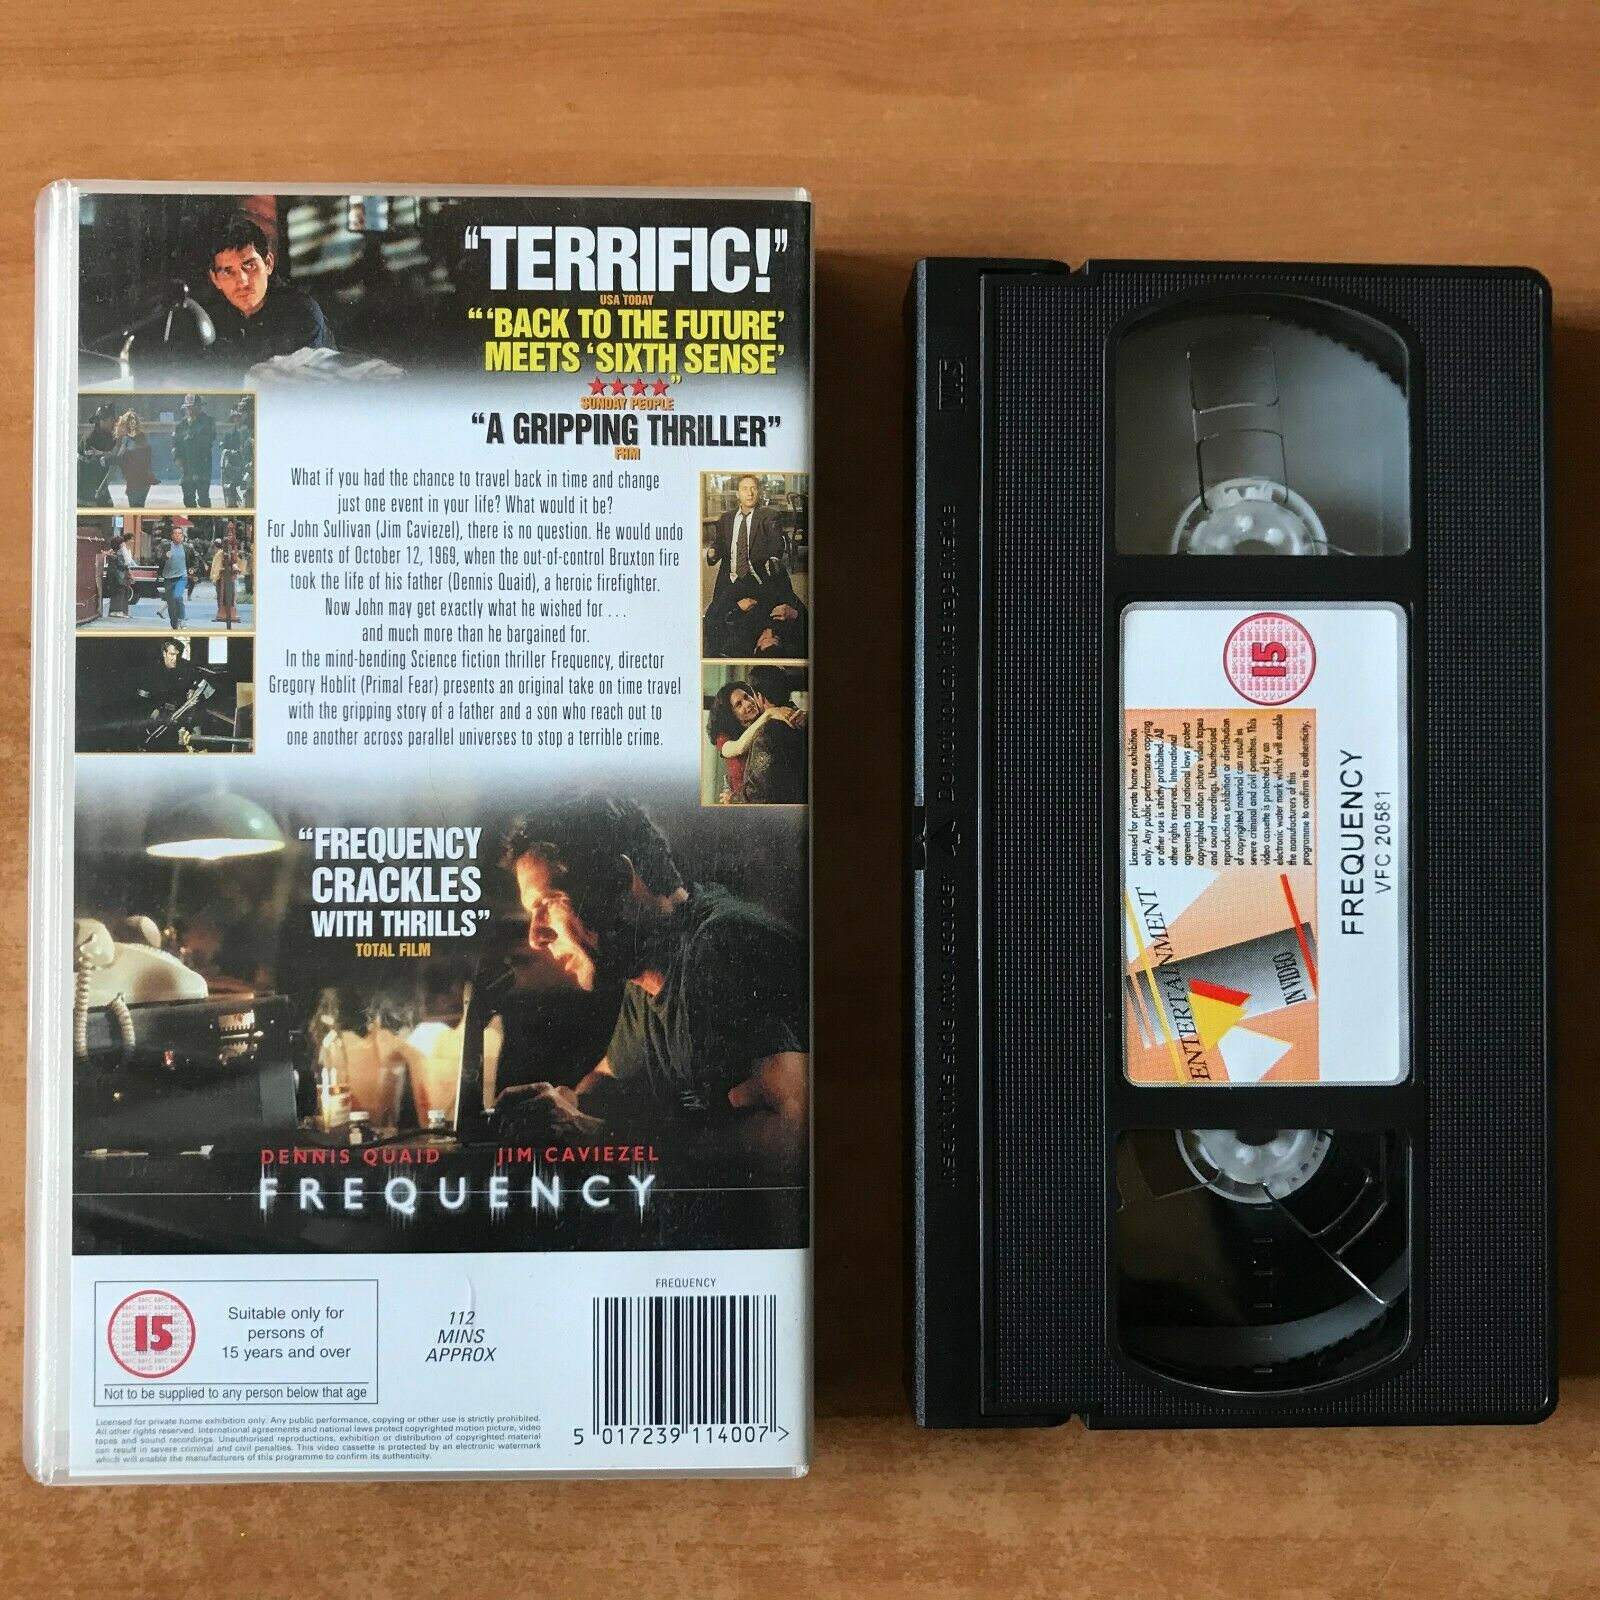 Frequency: Crime Drama [Butterfly Effect] Dennis Quaid / Jim Caviezel - Pal VHS-